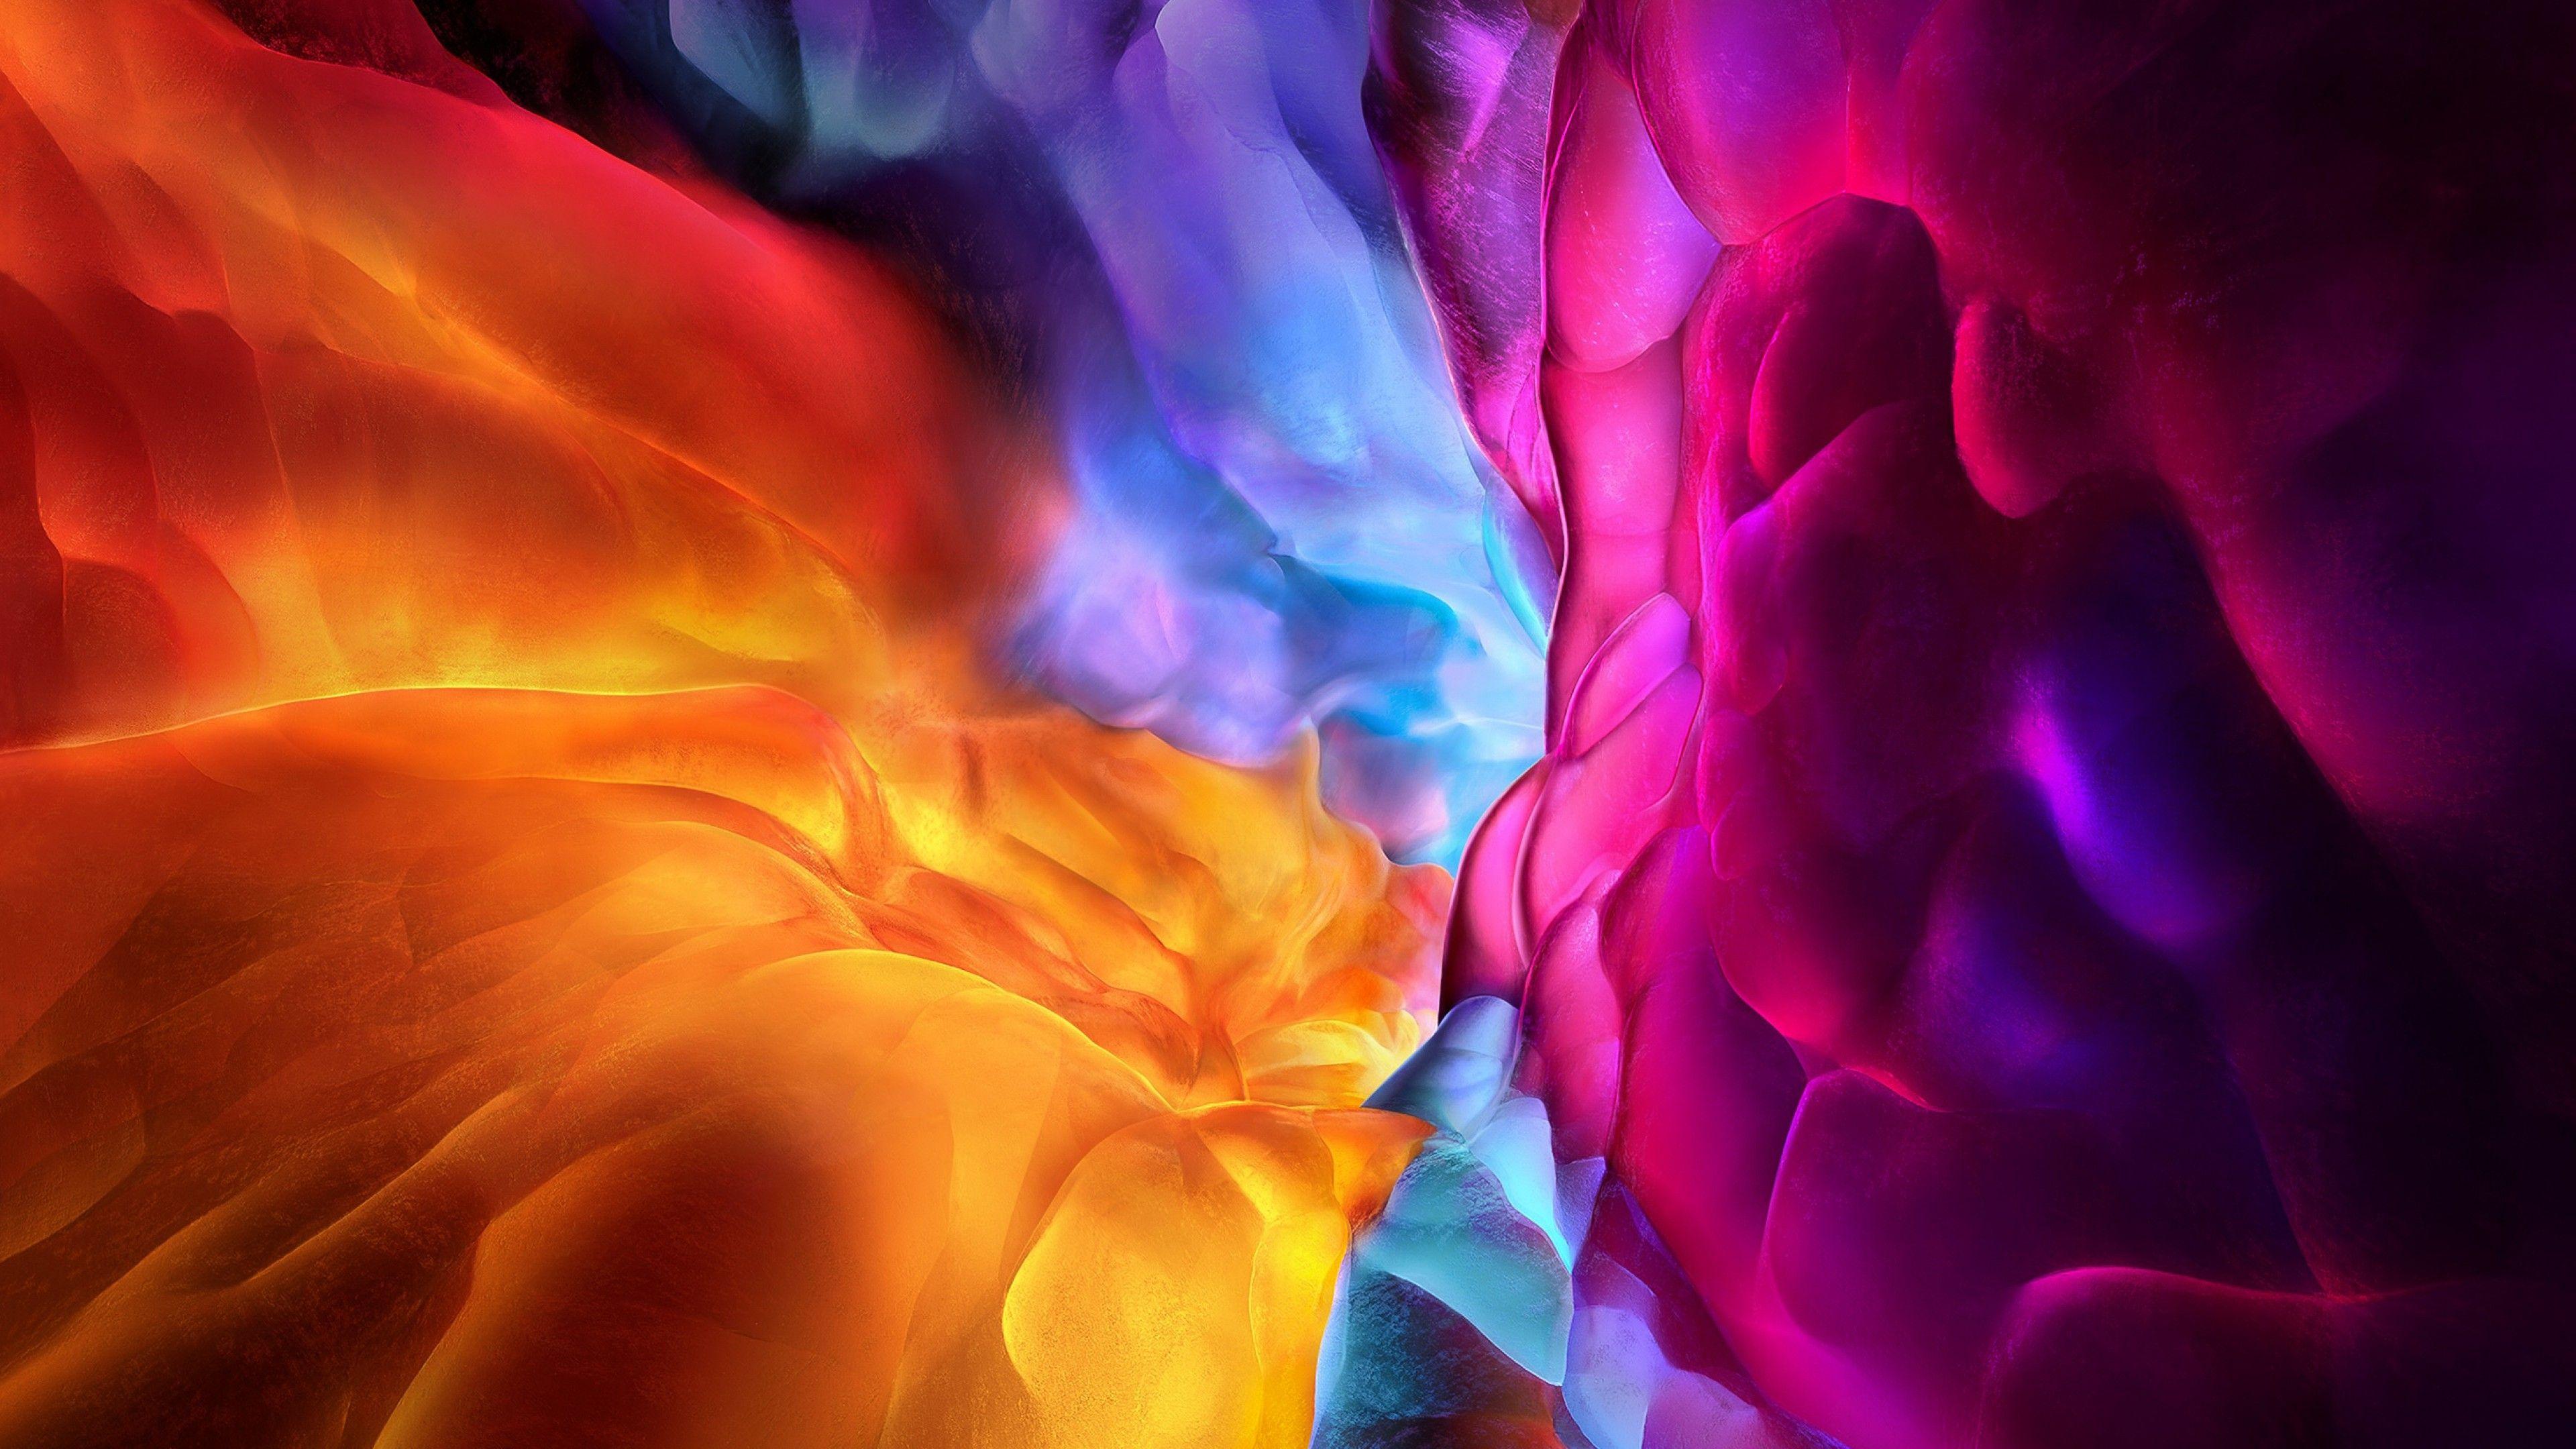 New iPad Pro Wallpapers - Top Free New